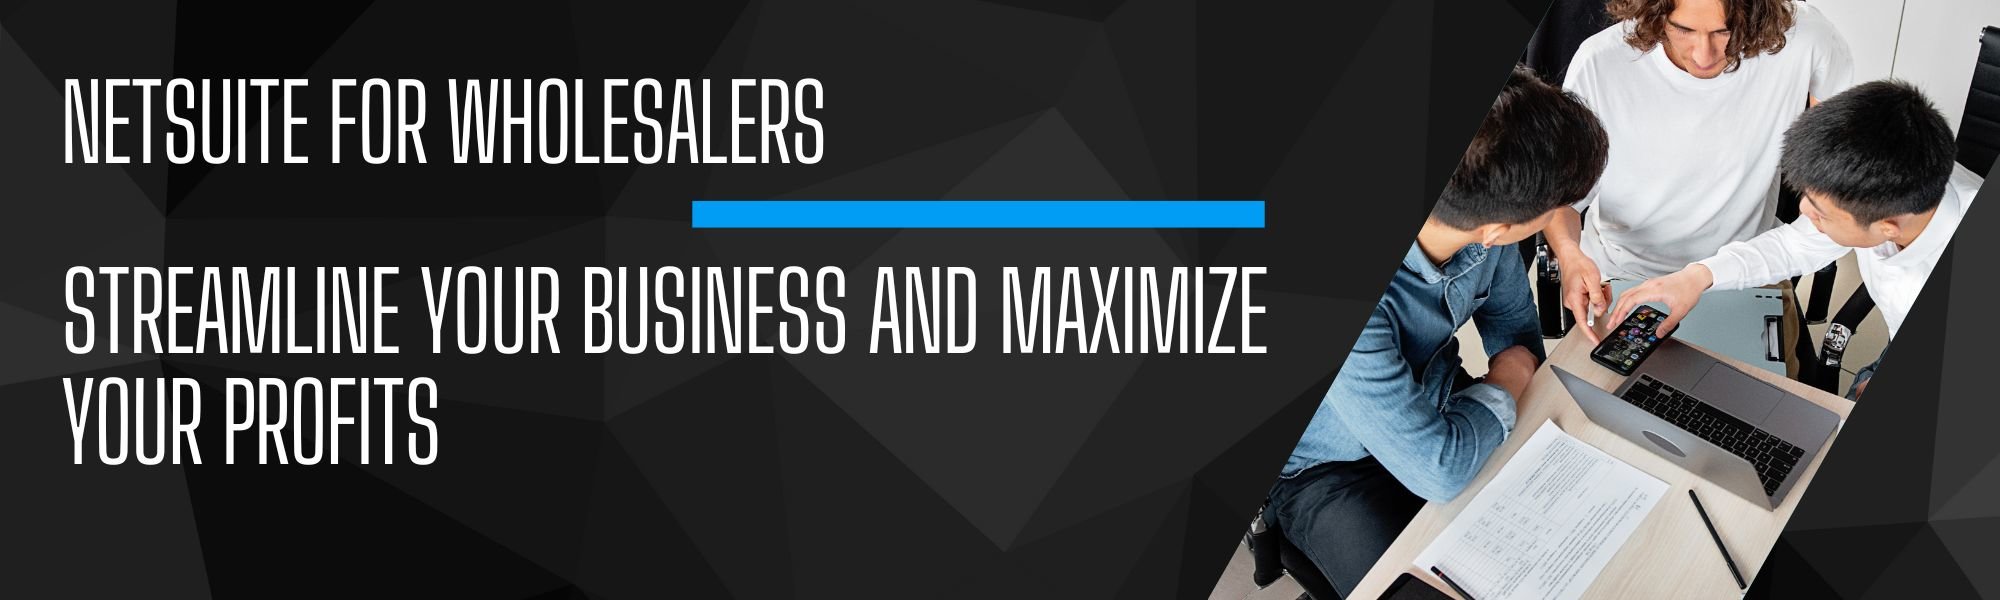 NetSuite for Wholesalers: Streamline Your Business and Maximize Your Profits